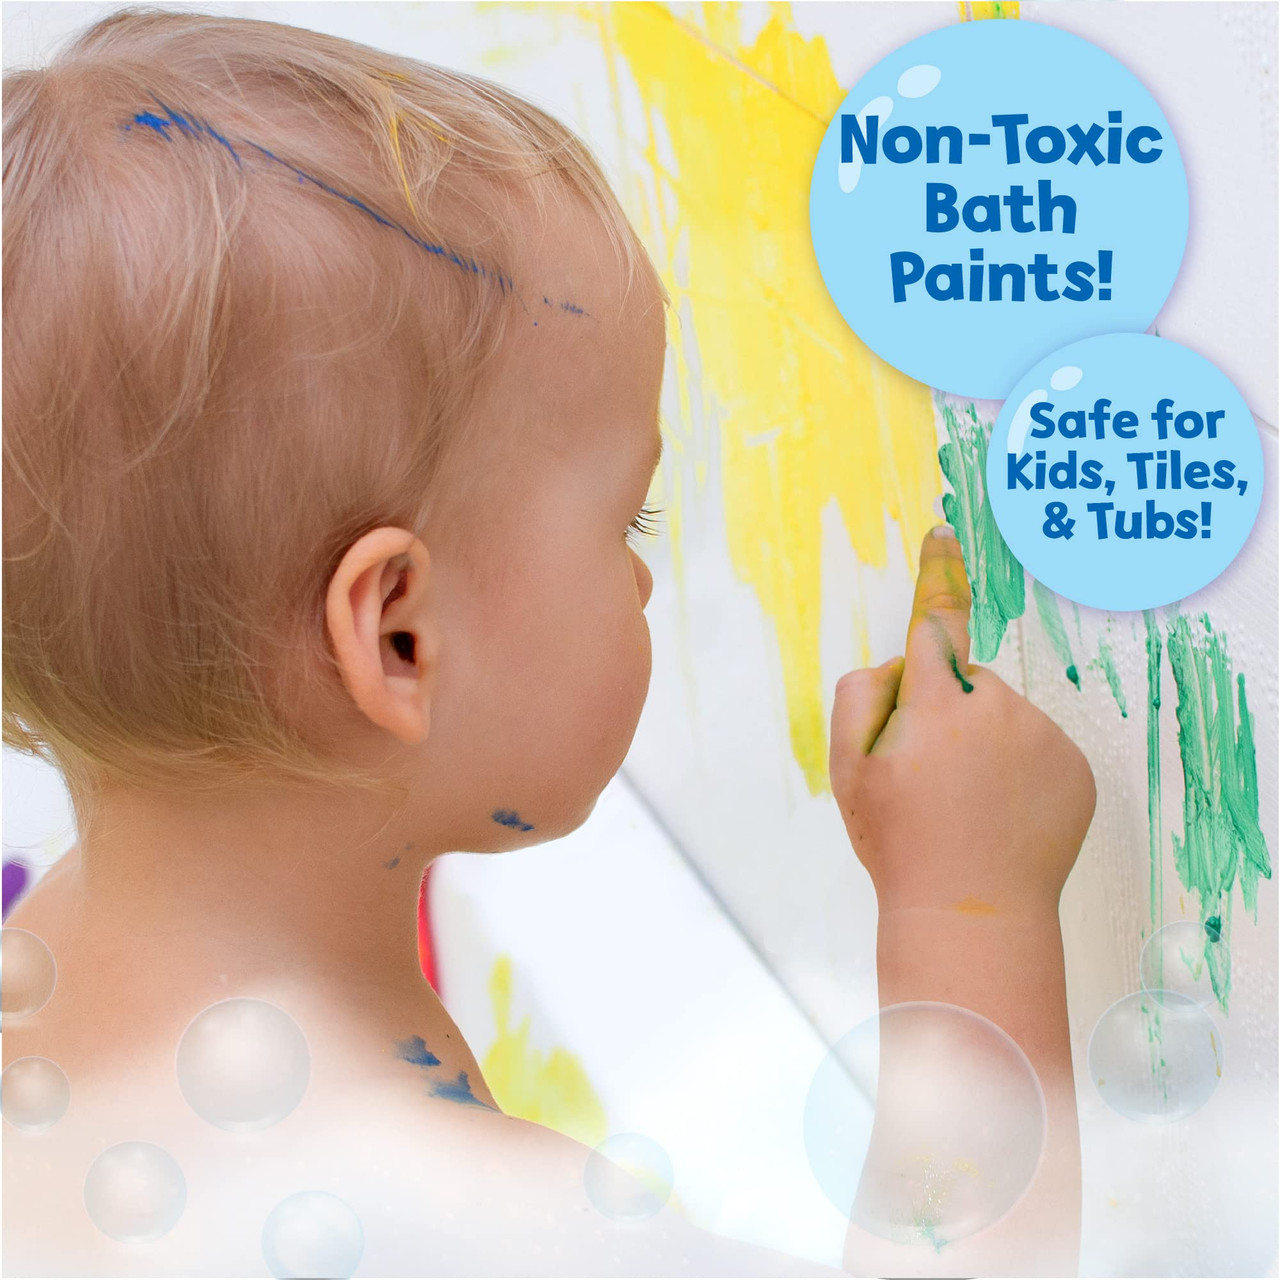  Bath Paints For Toddlers Non Toxic